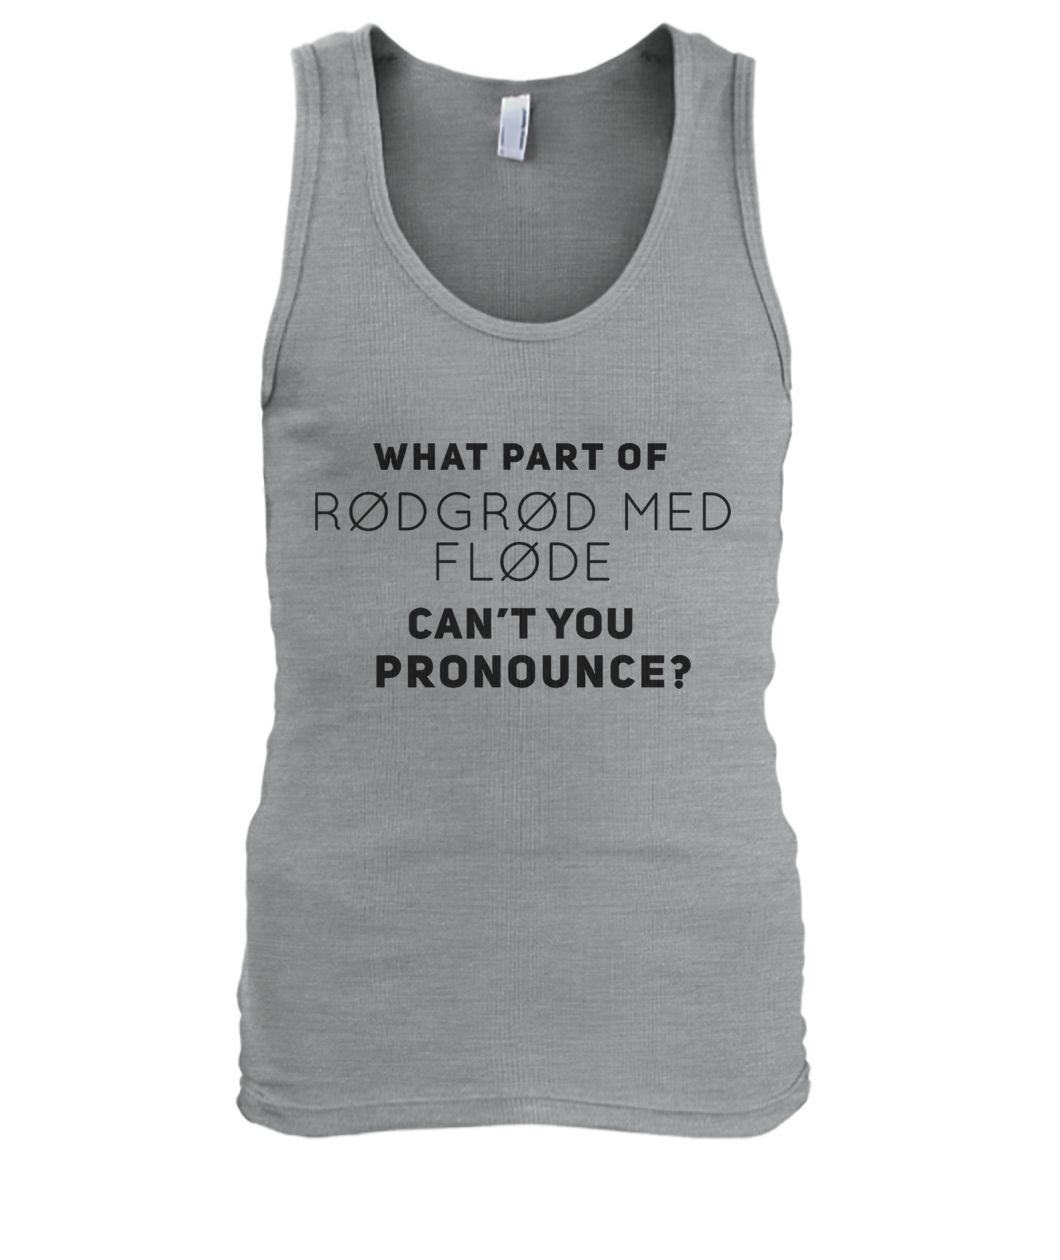 What part of rodgrod med flode can't you pronounce men's tank top